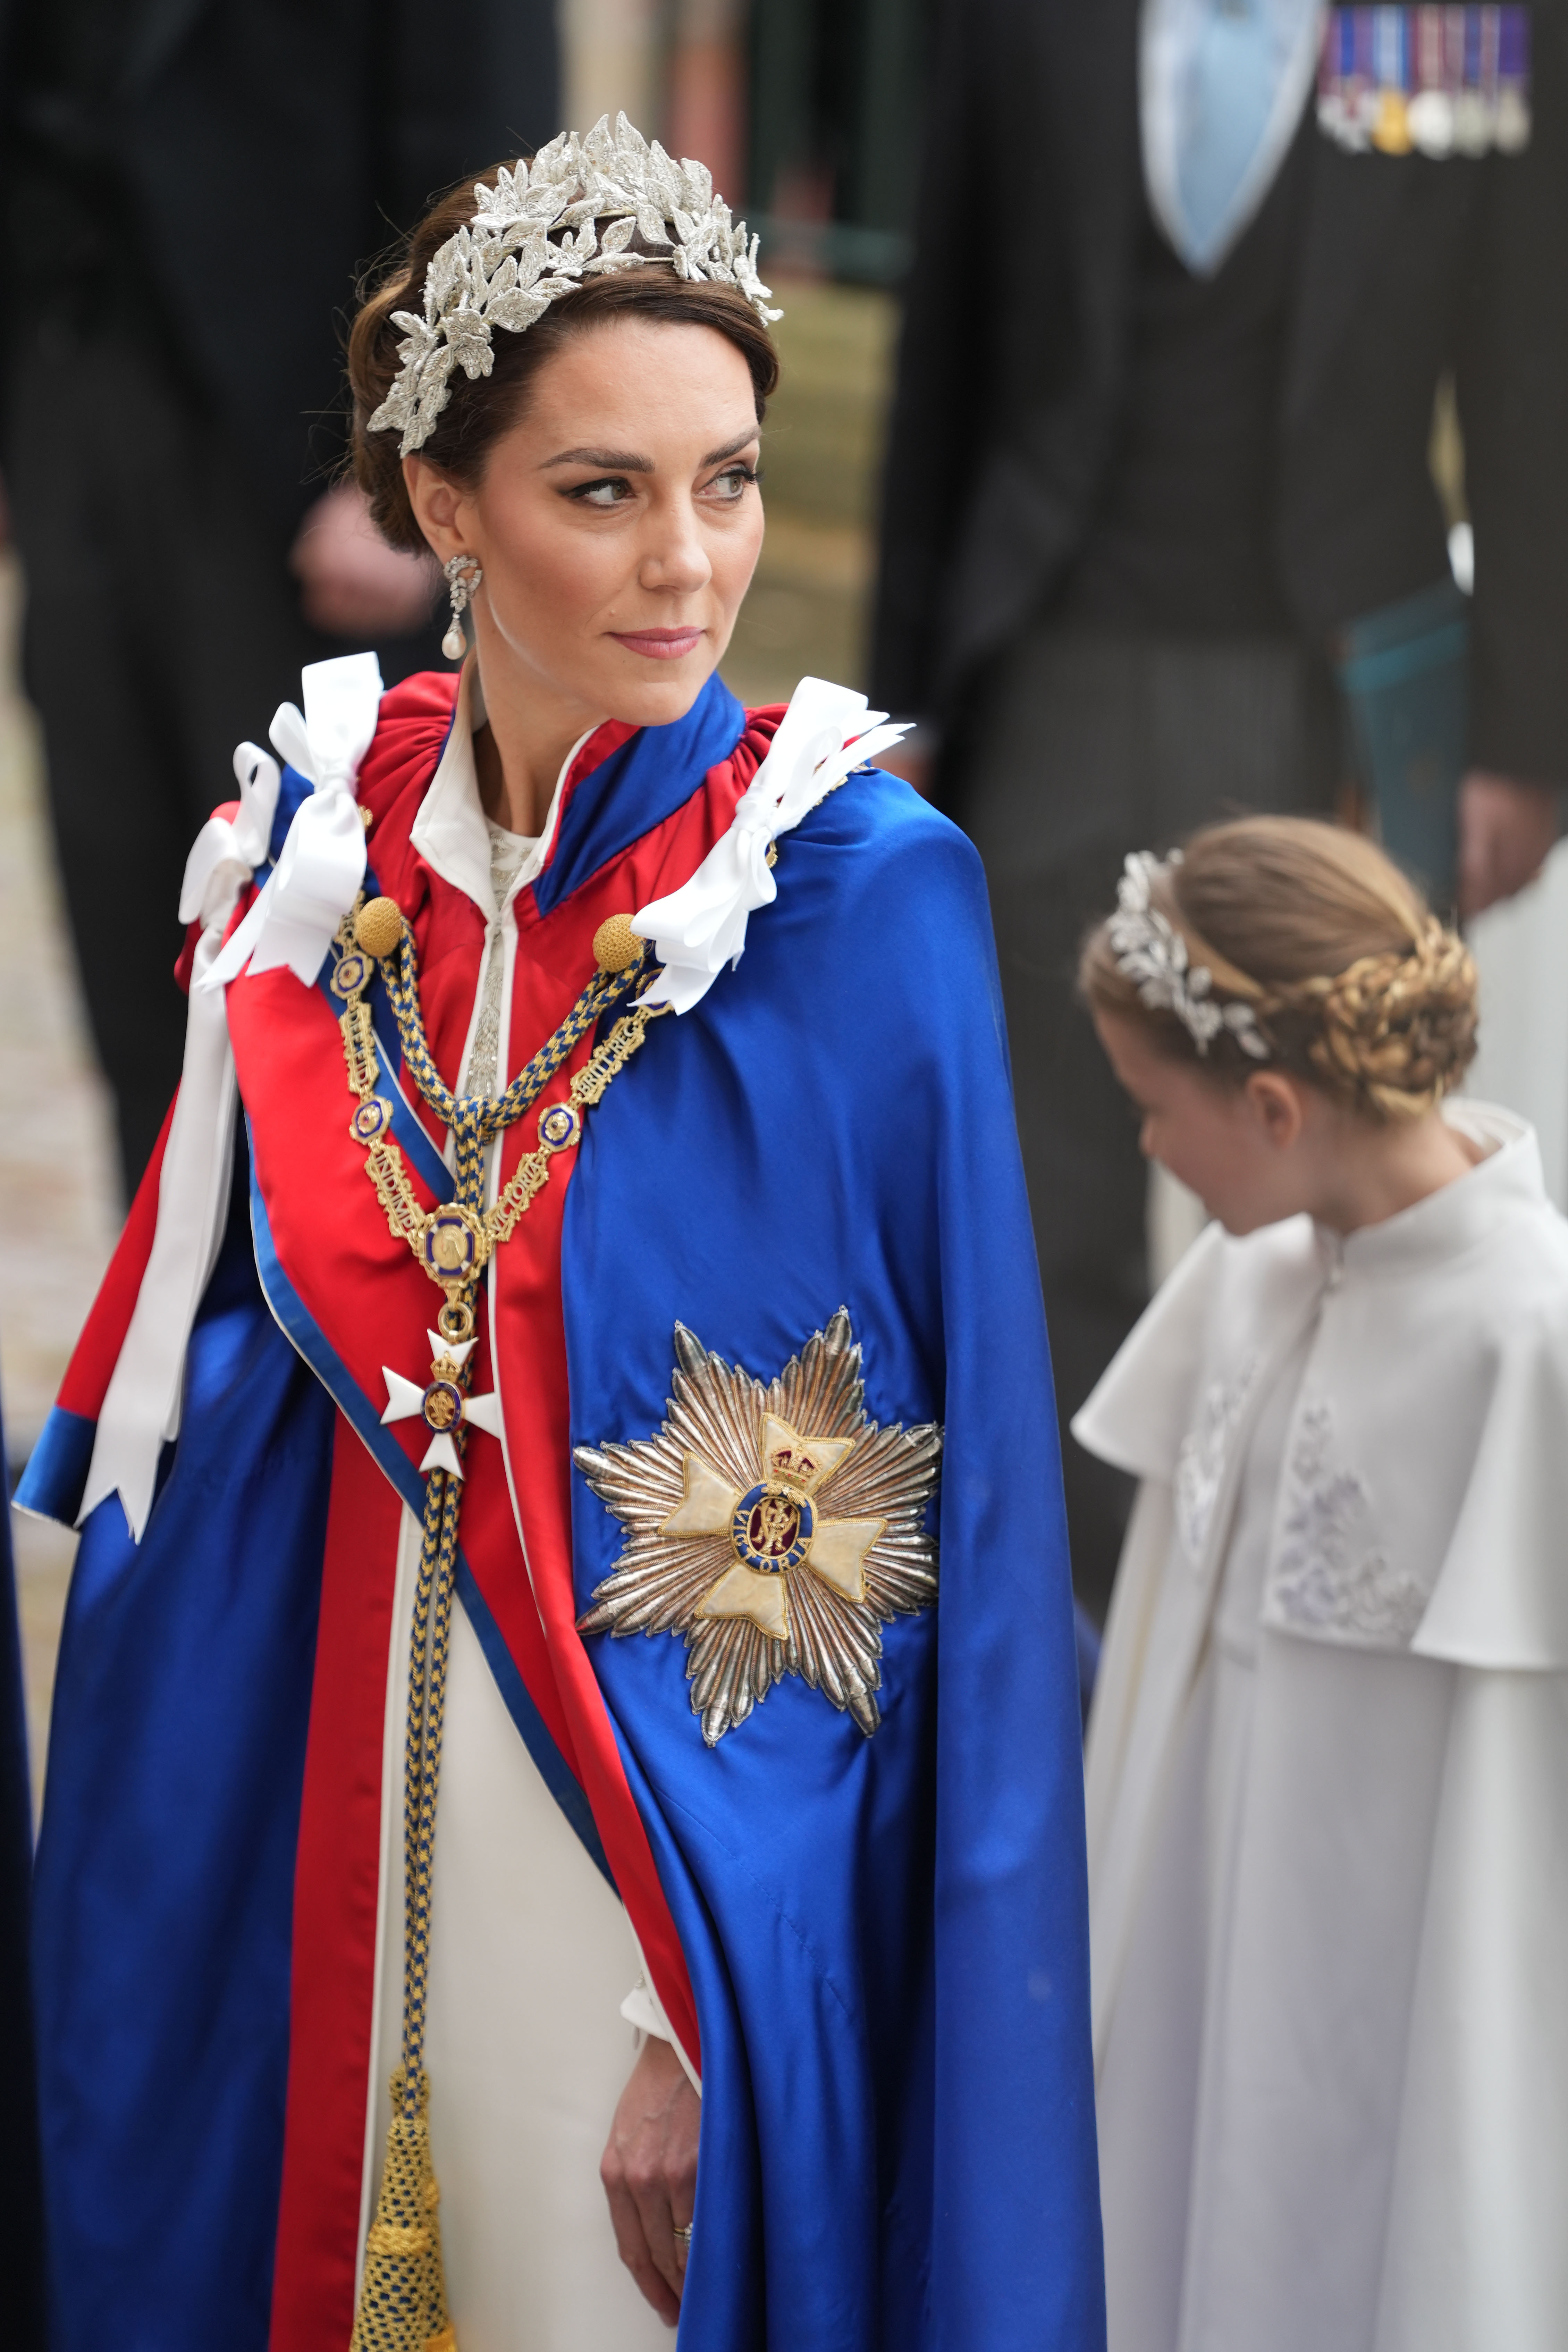 Catherine Middleton, Princess of Wales, during the Coronation of King Charles III and Queen Camilla on May 6, 2023 in London, England.  | Source: Getty Images